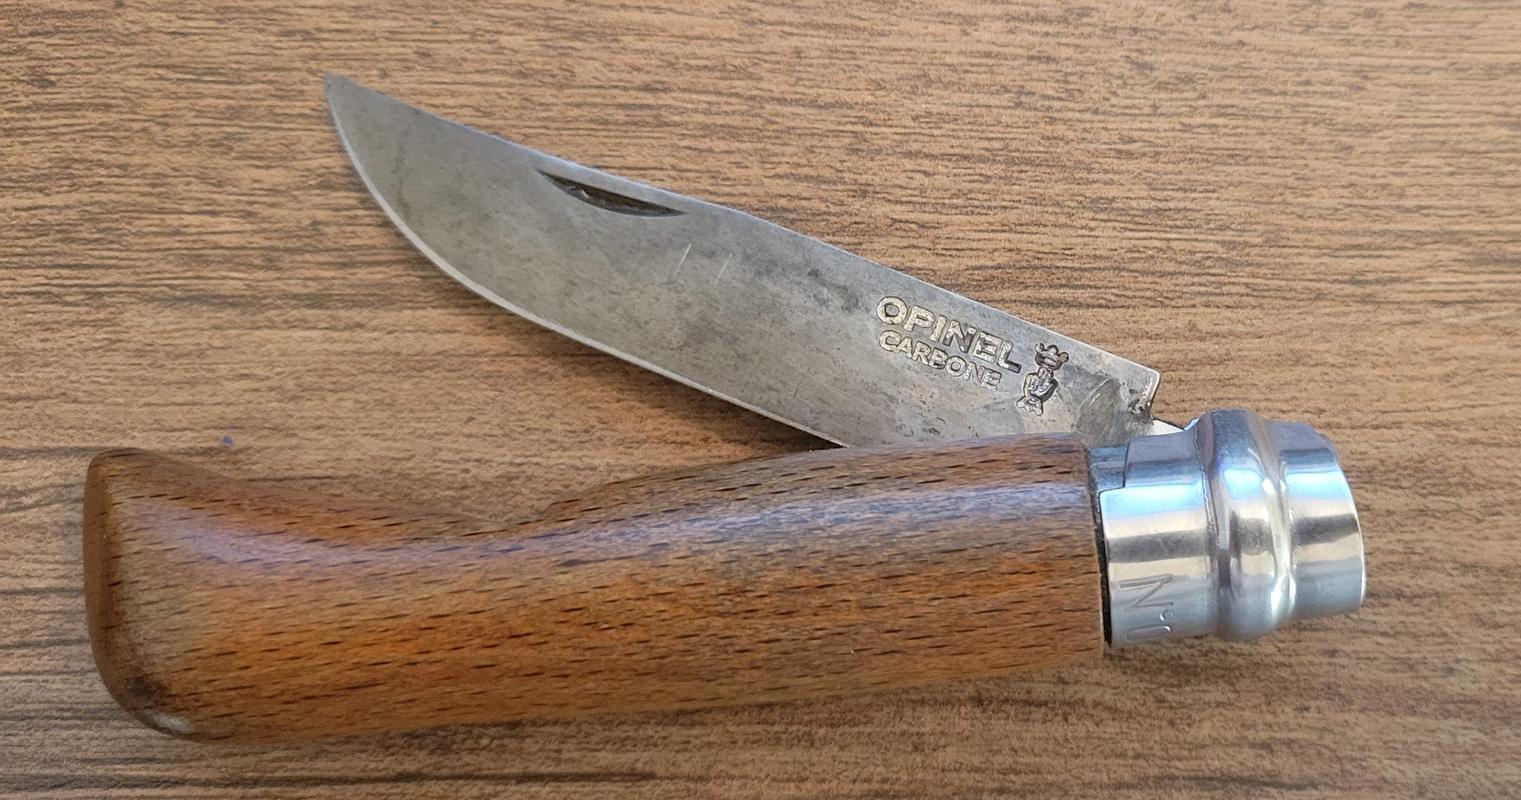 opinel knife no.7